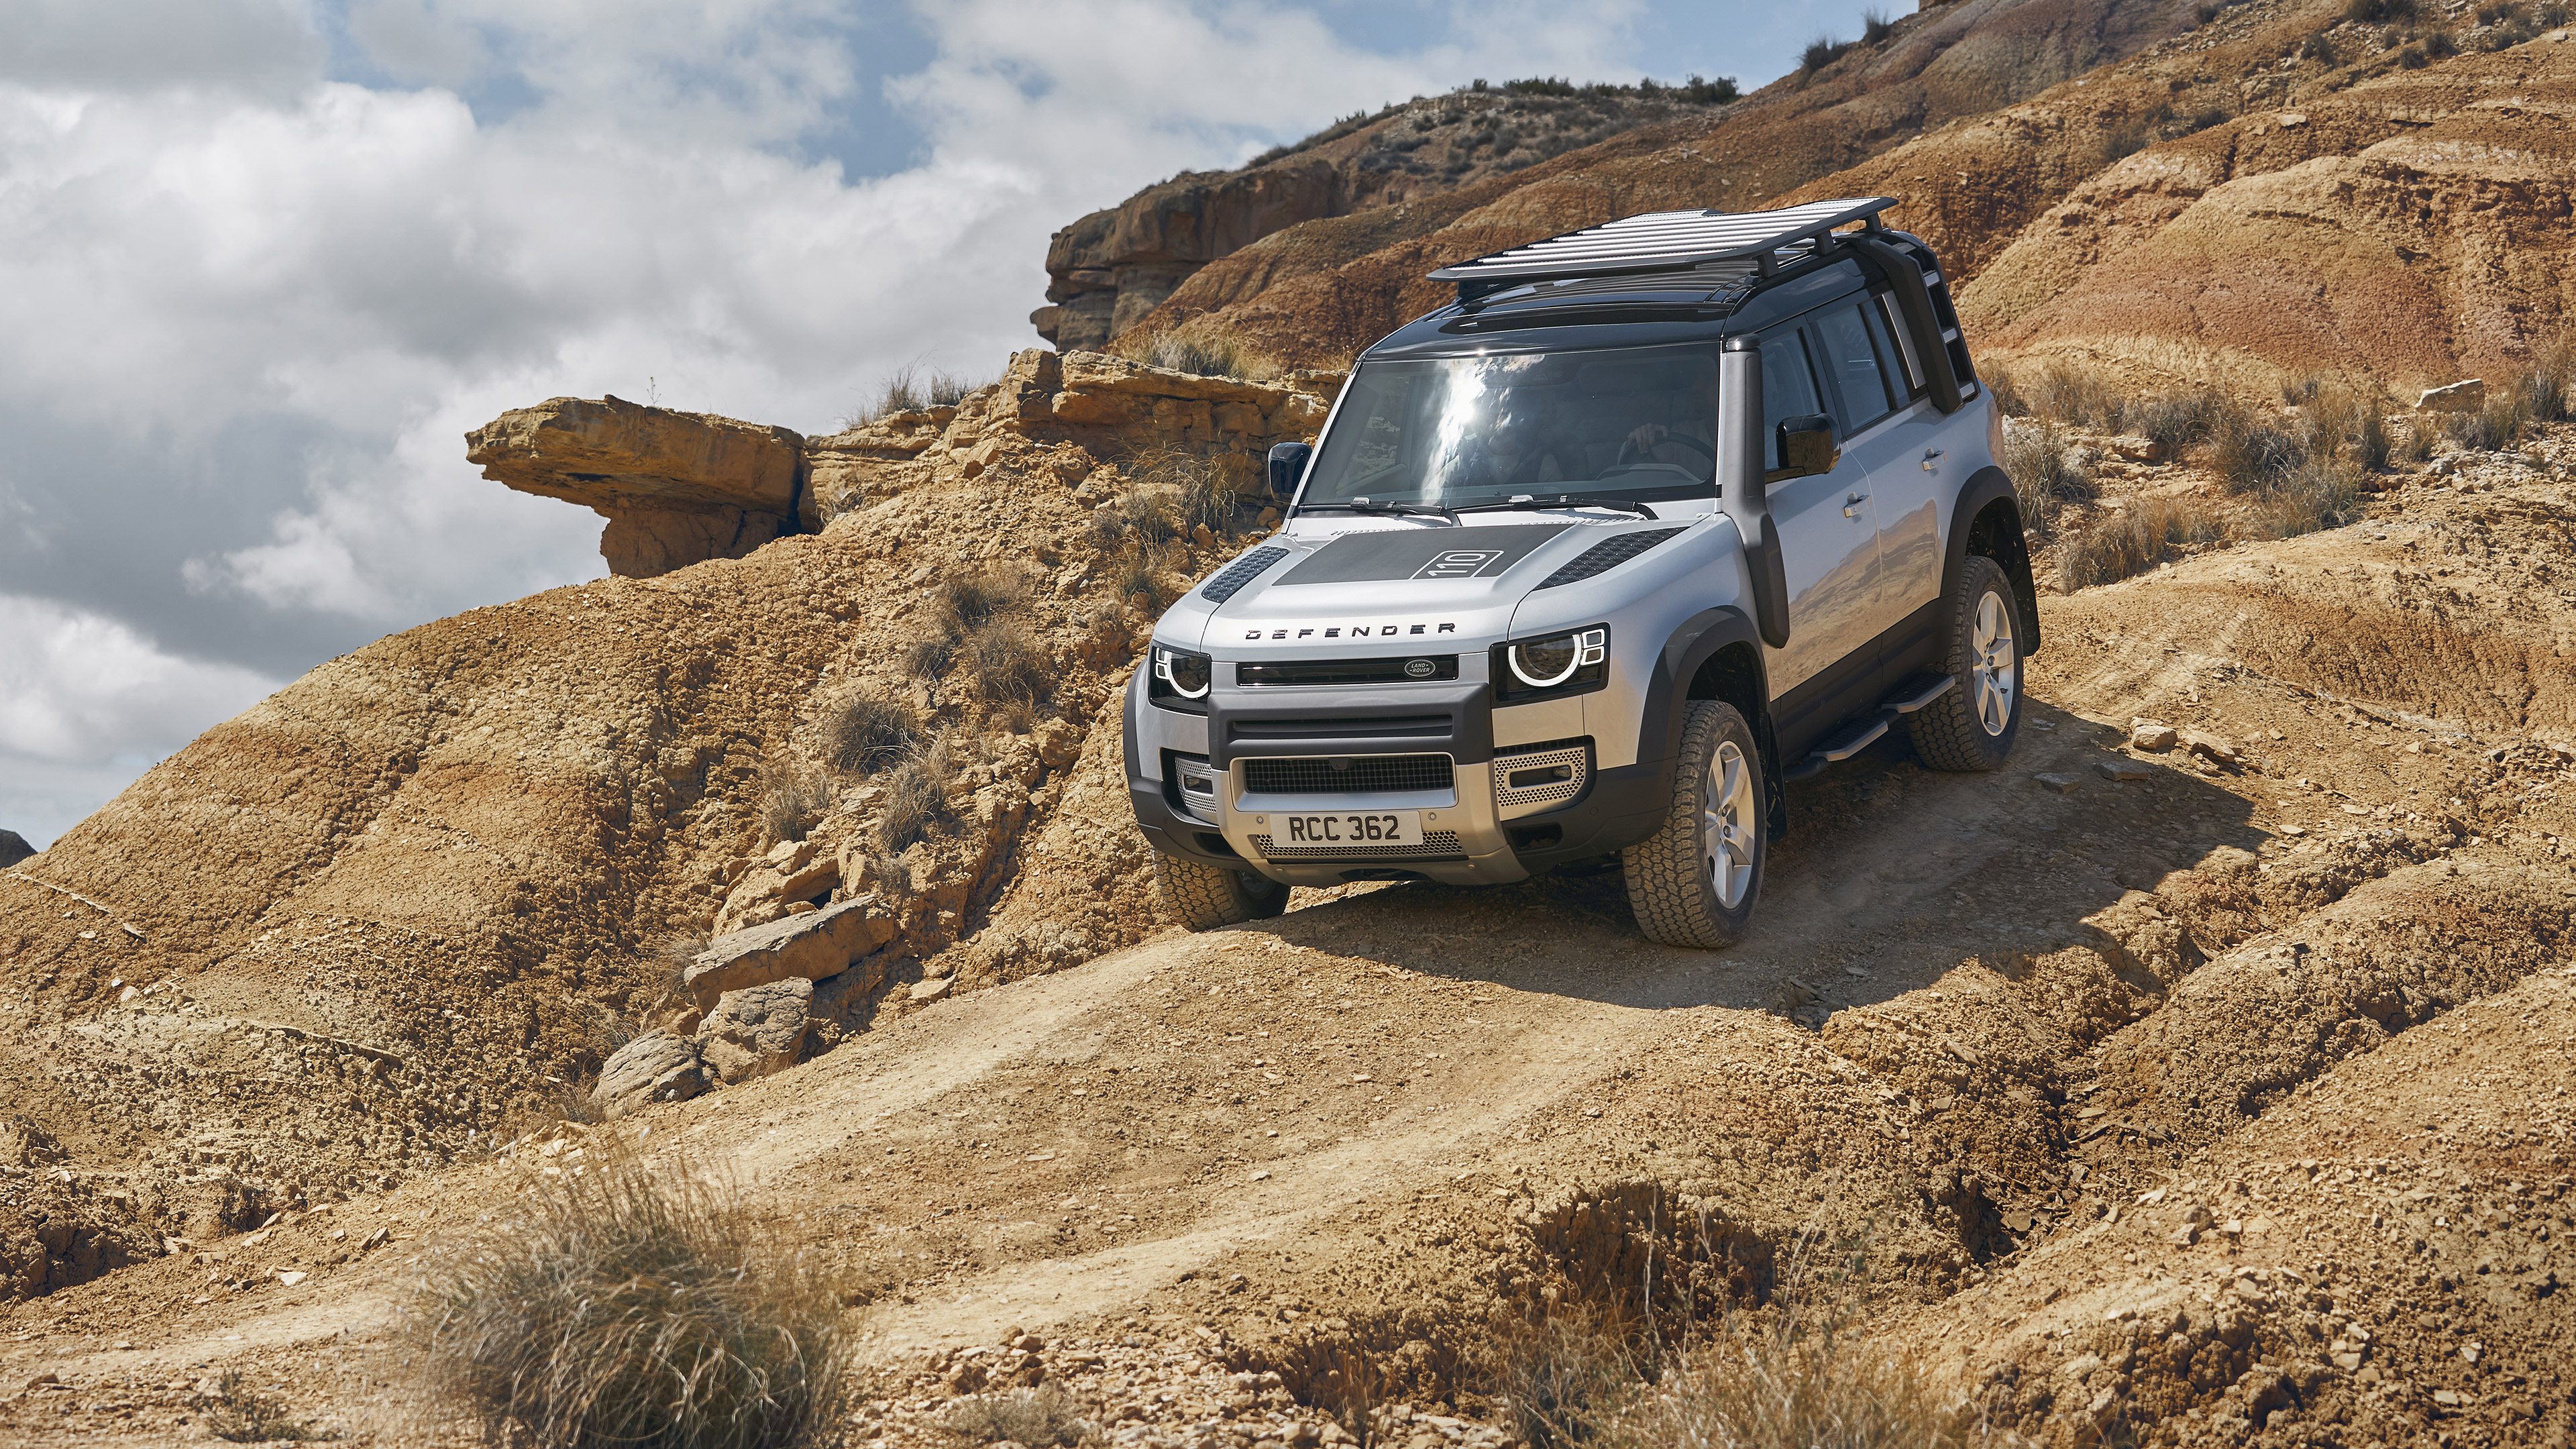 General 3840x2160 Land Rover Land Rover Defender car vehicle SUV offroad 4x4 desert British cars